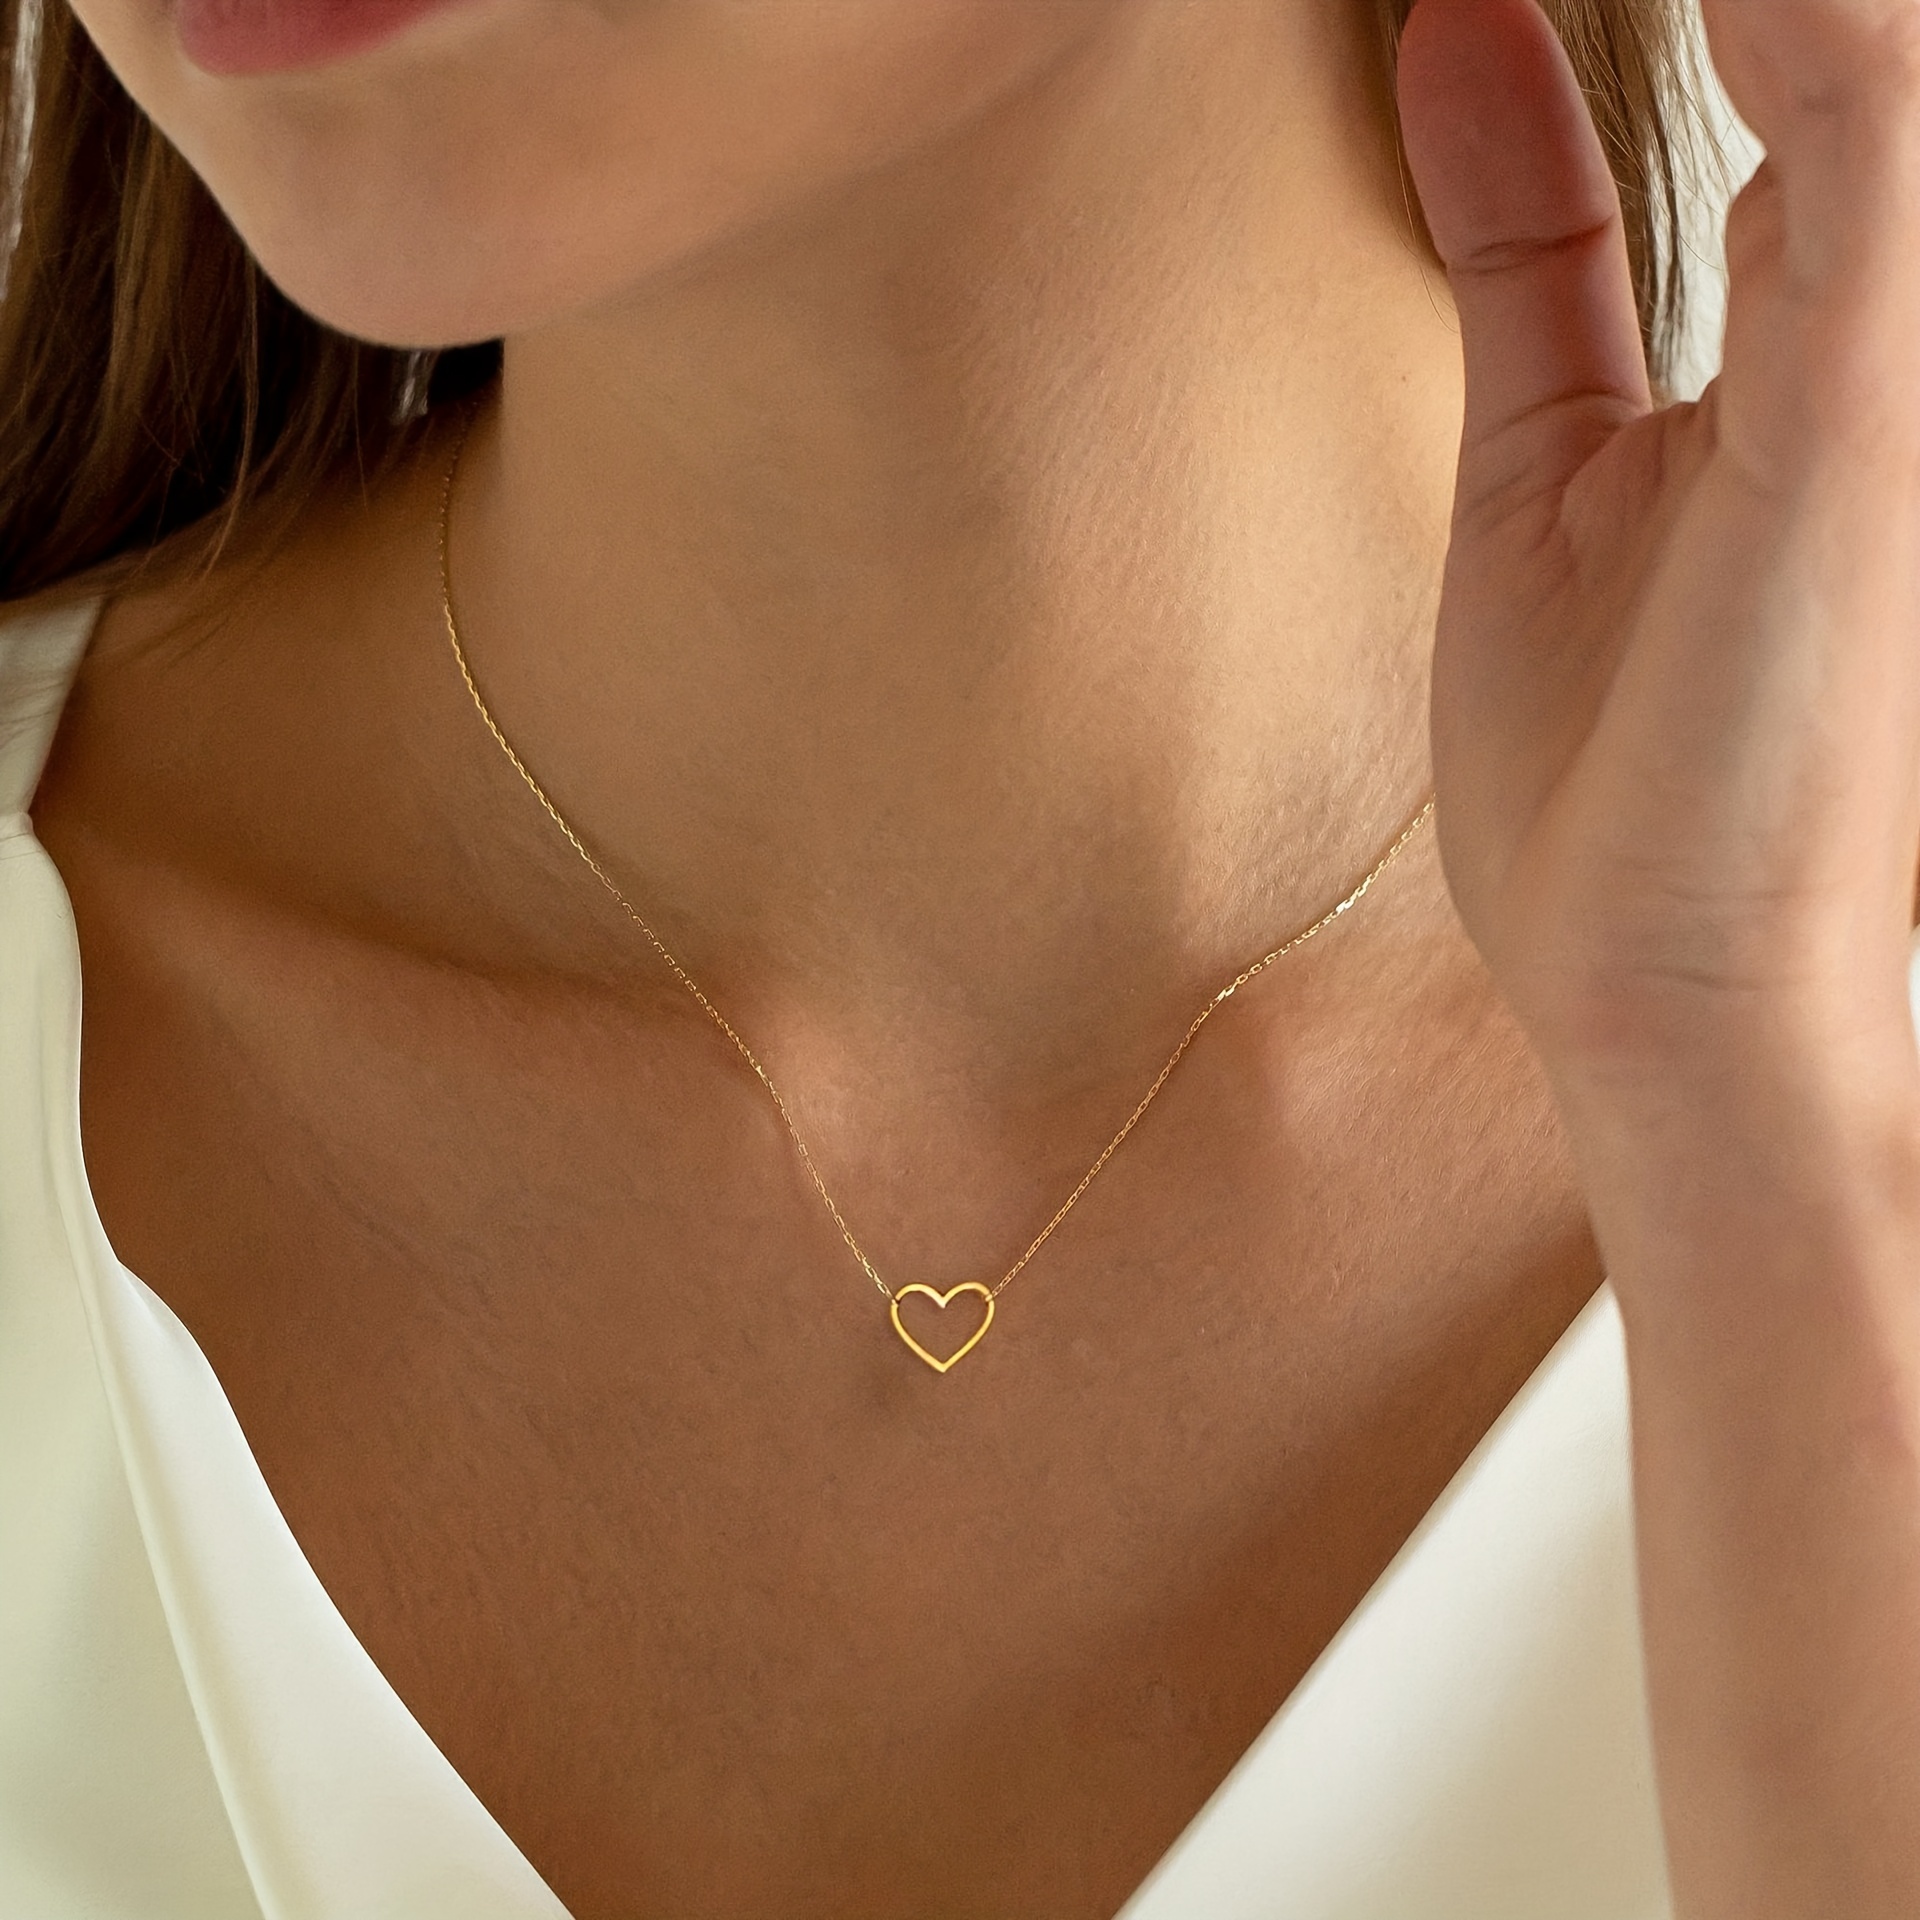 Gold Flower Charm Necklace Minimalist Necklace Simple Cute 